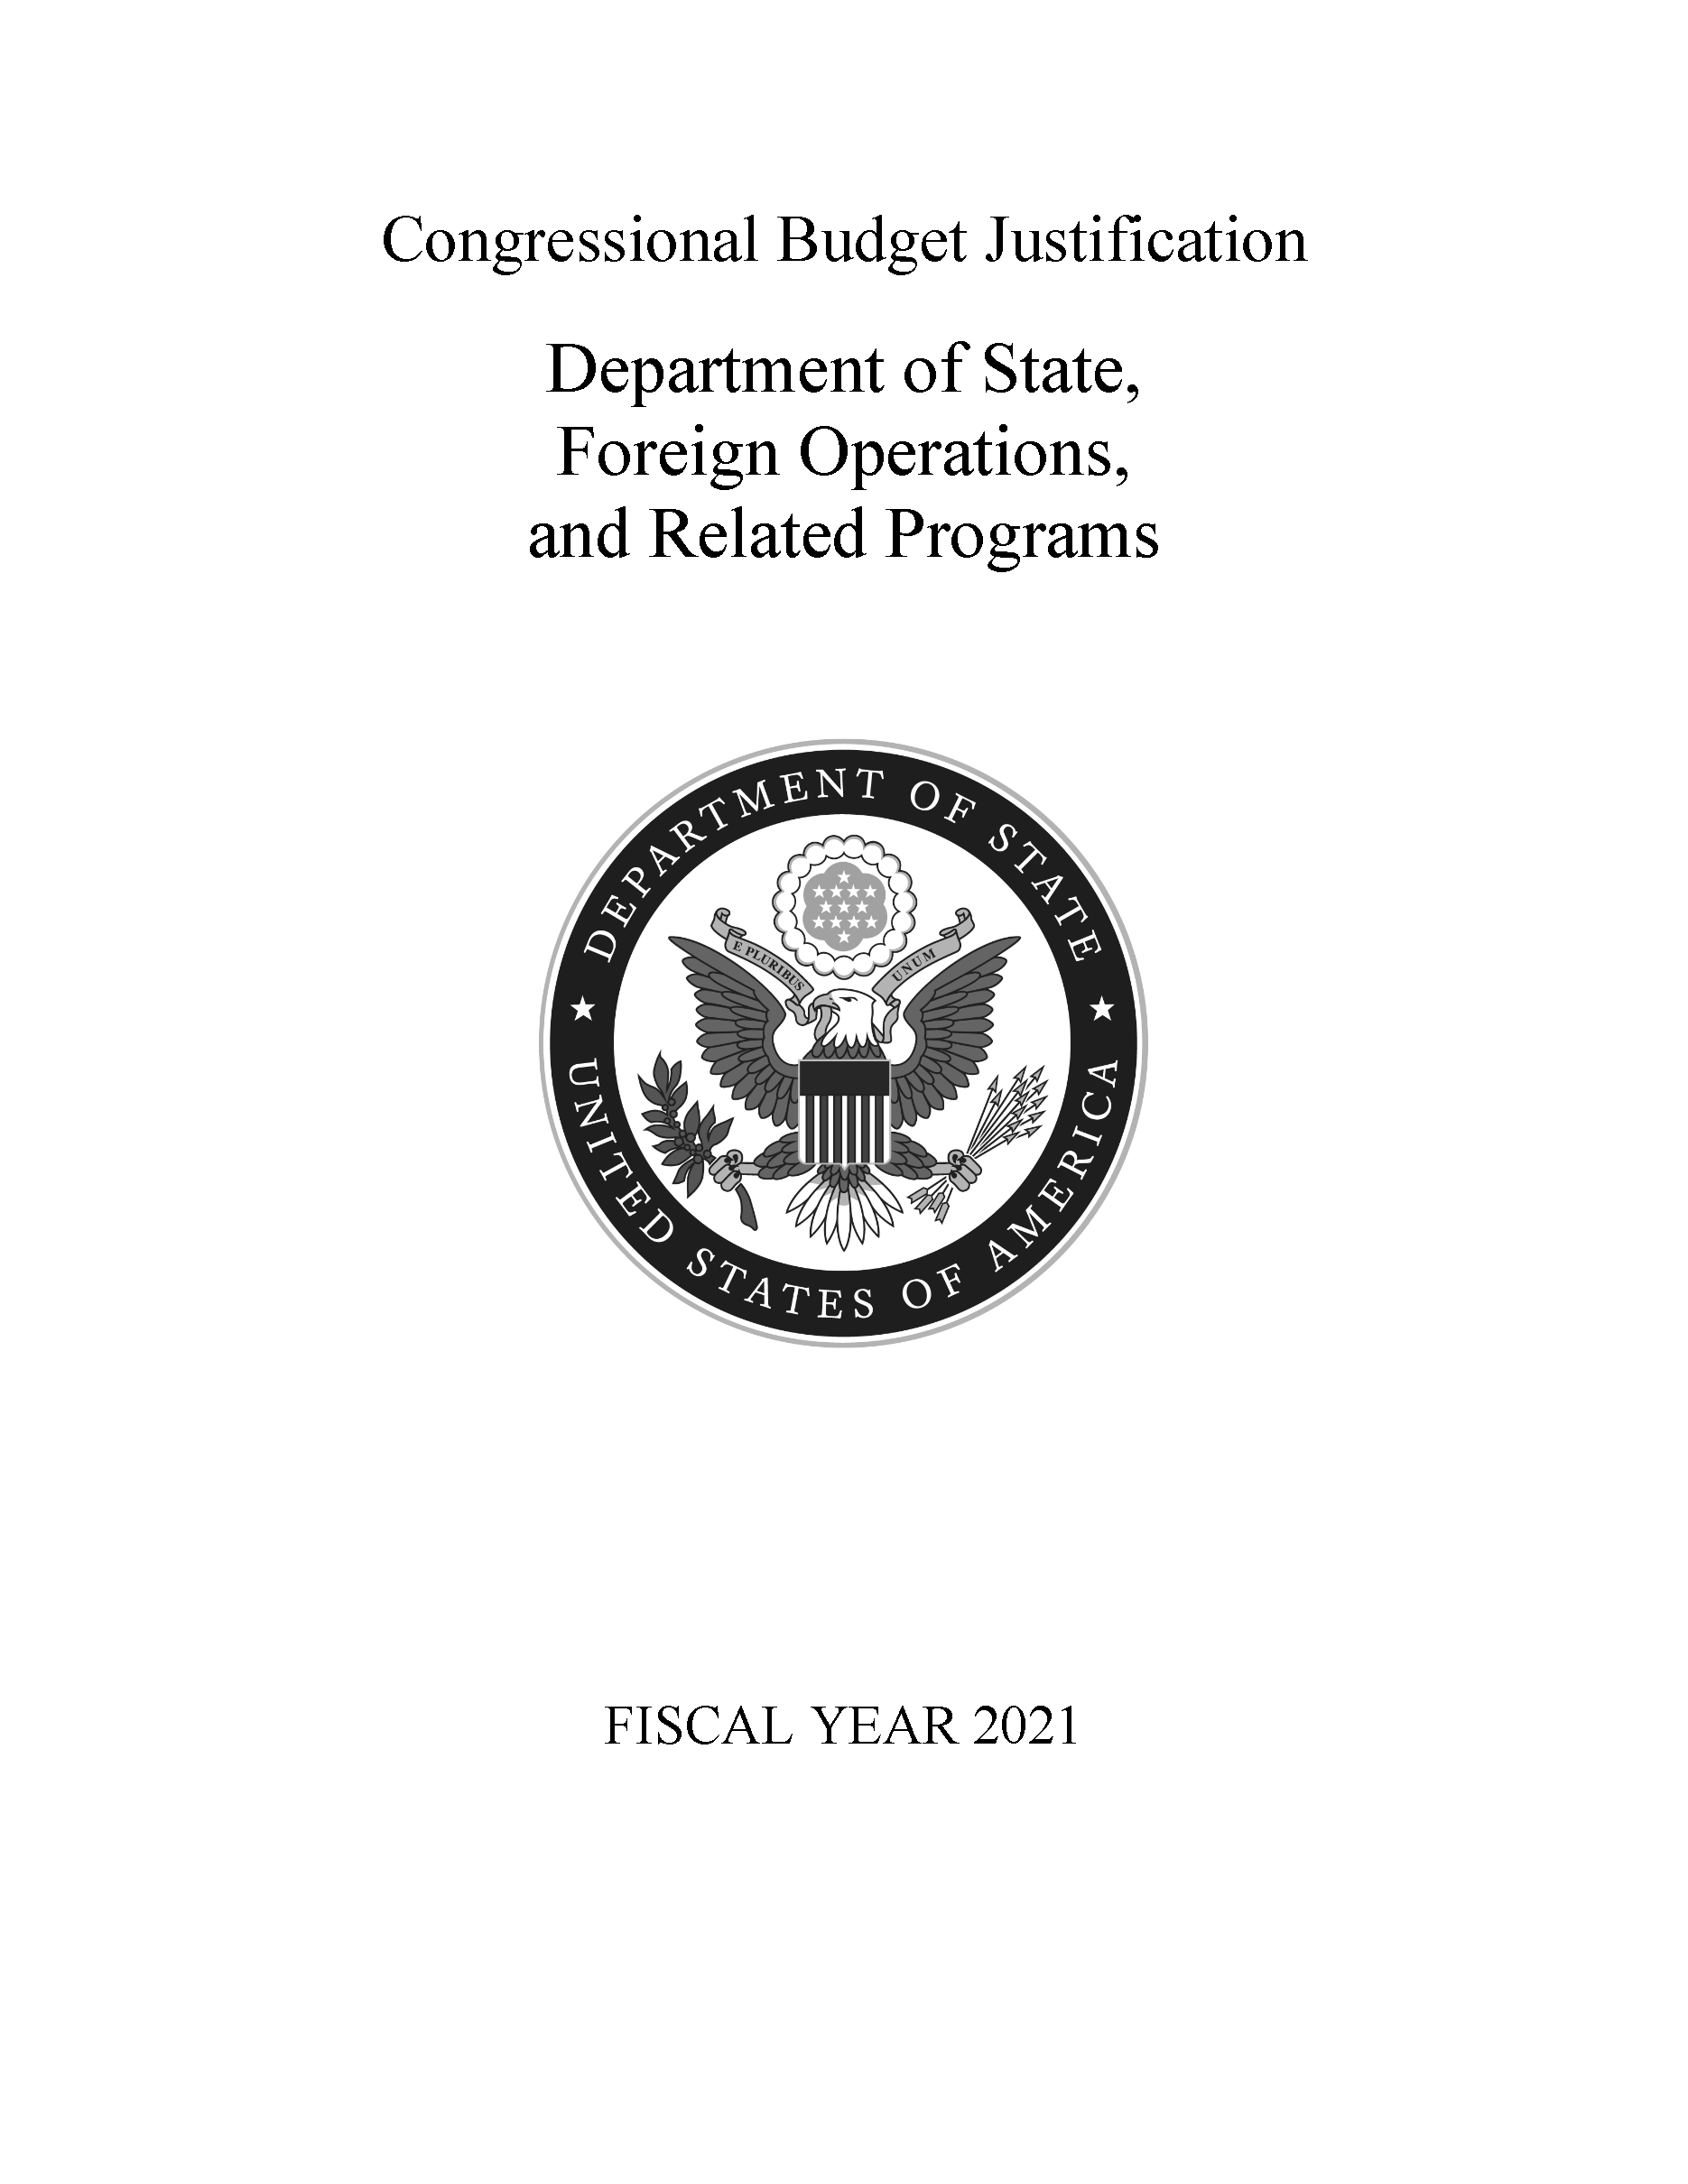 FY 2021 Congressional Budget Justification - Department of State, Foreign Operations, and Related Programs